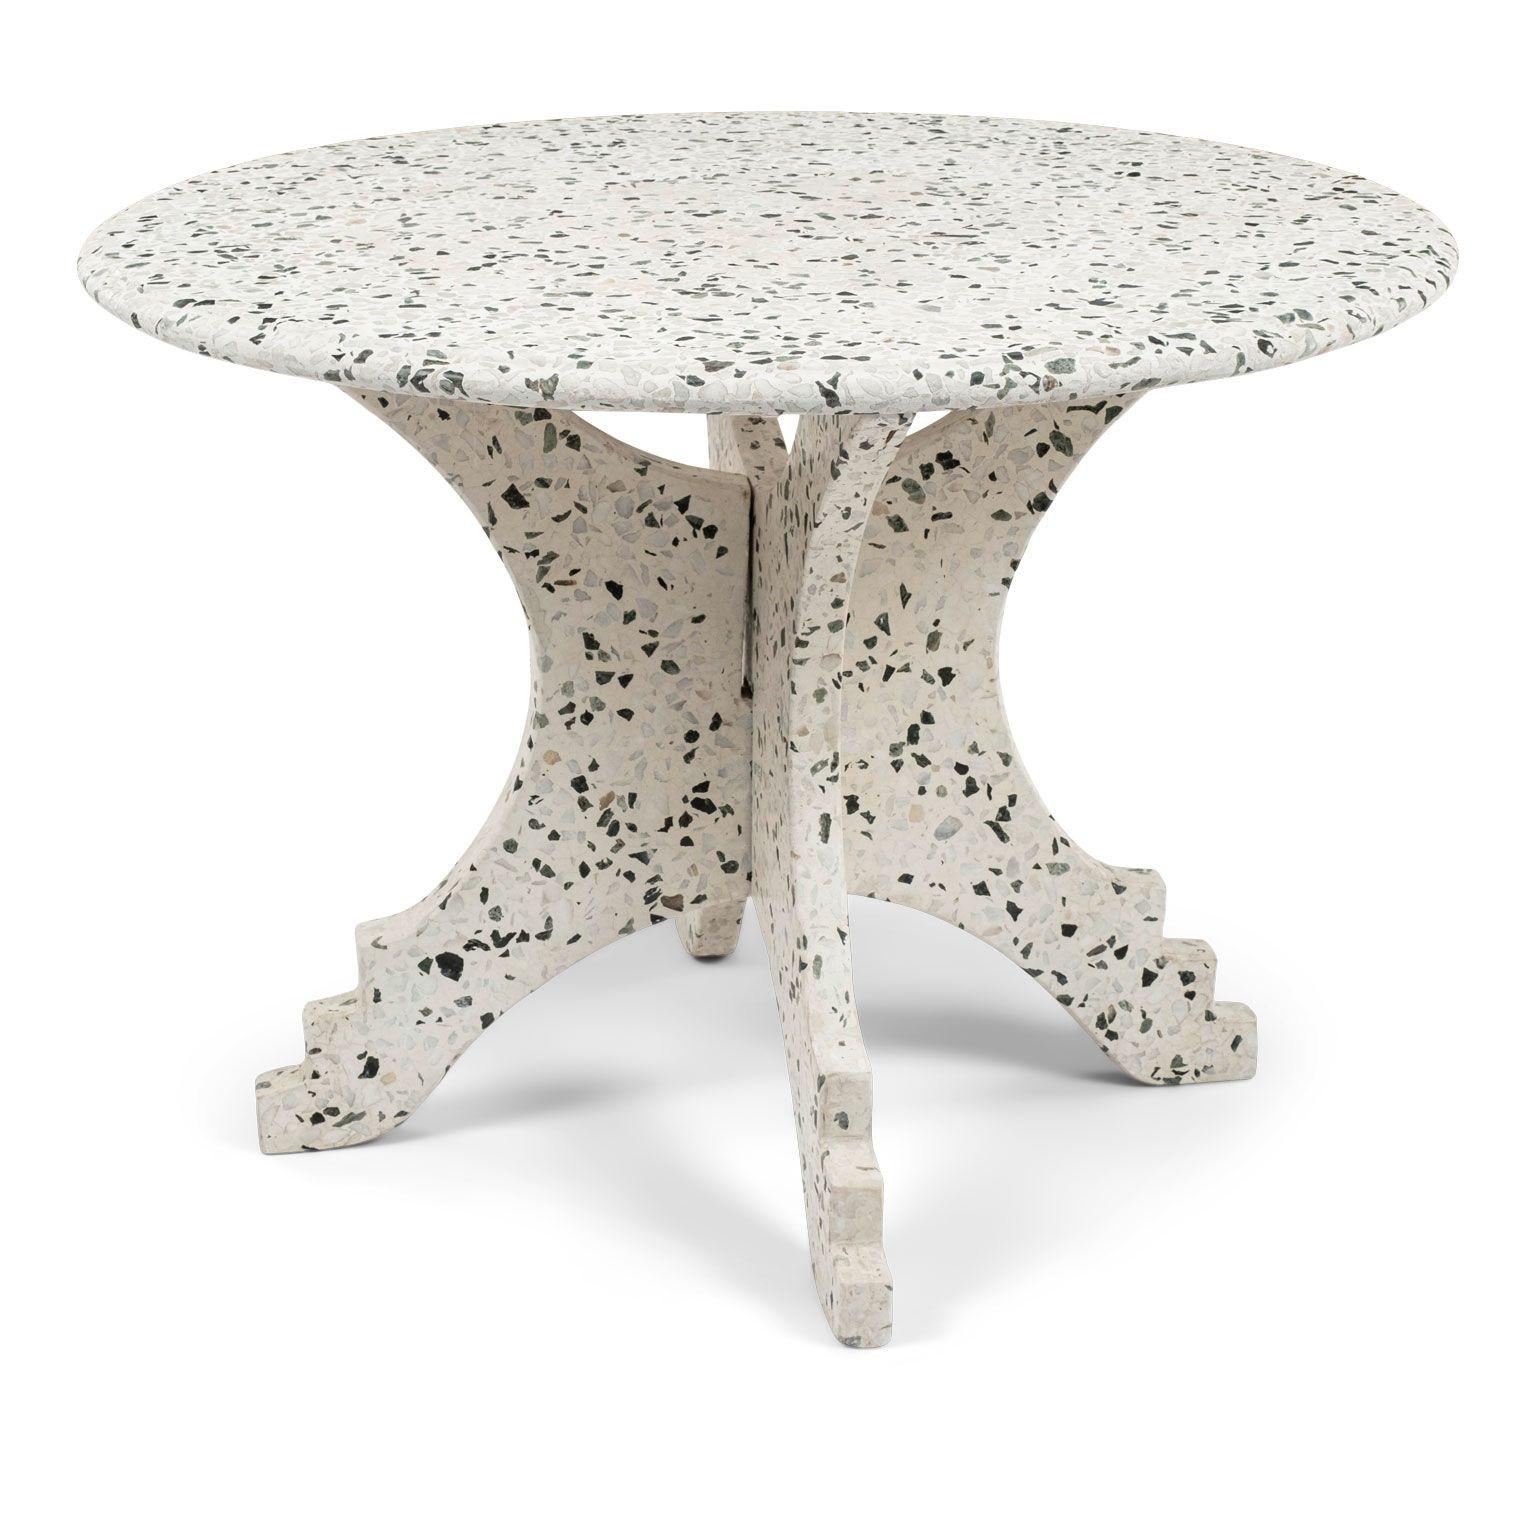 Large Round Vintage Blue and White Terrazzo Table For Sale 6